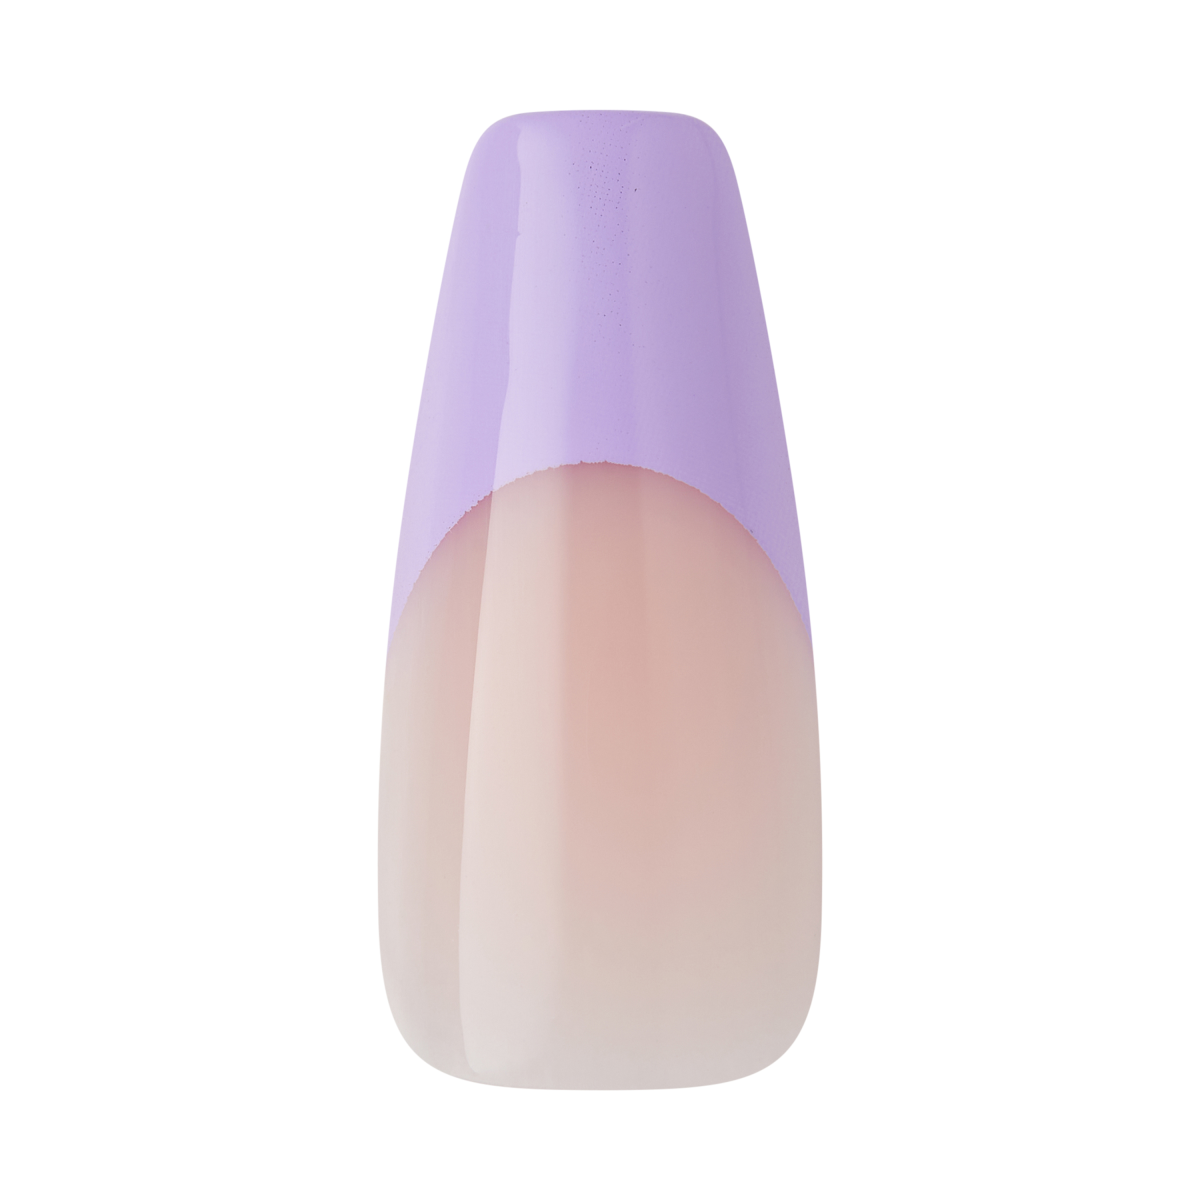 KISS Voguish Fantasy, Press-On Nails, Sunkissed, Purple, Long Coffin, 28ct